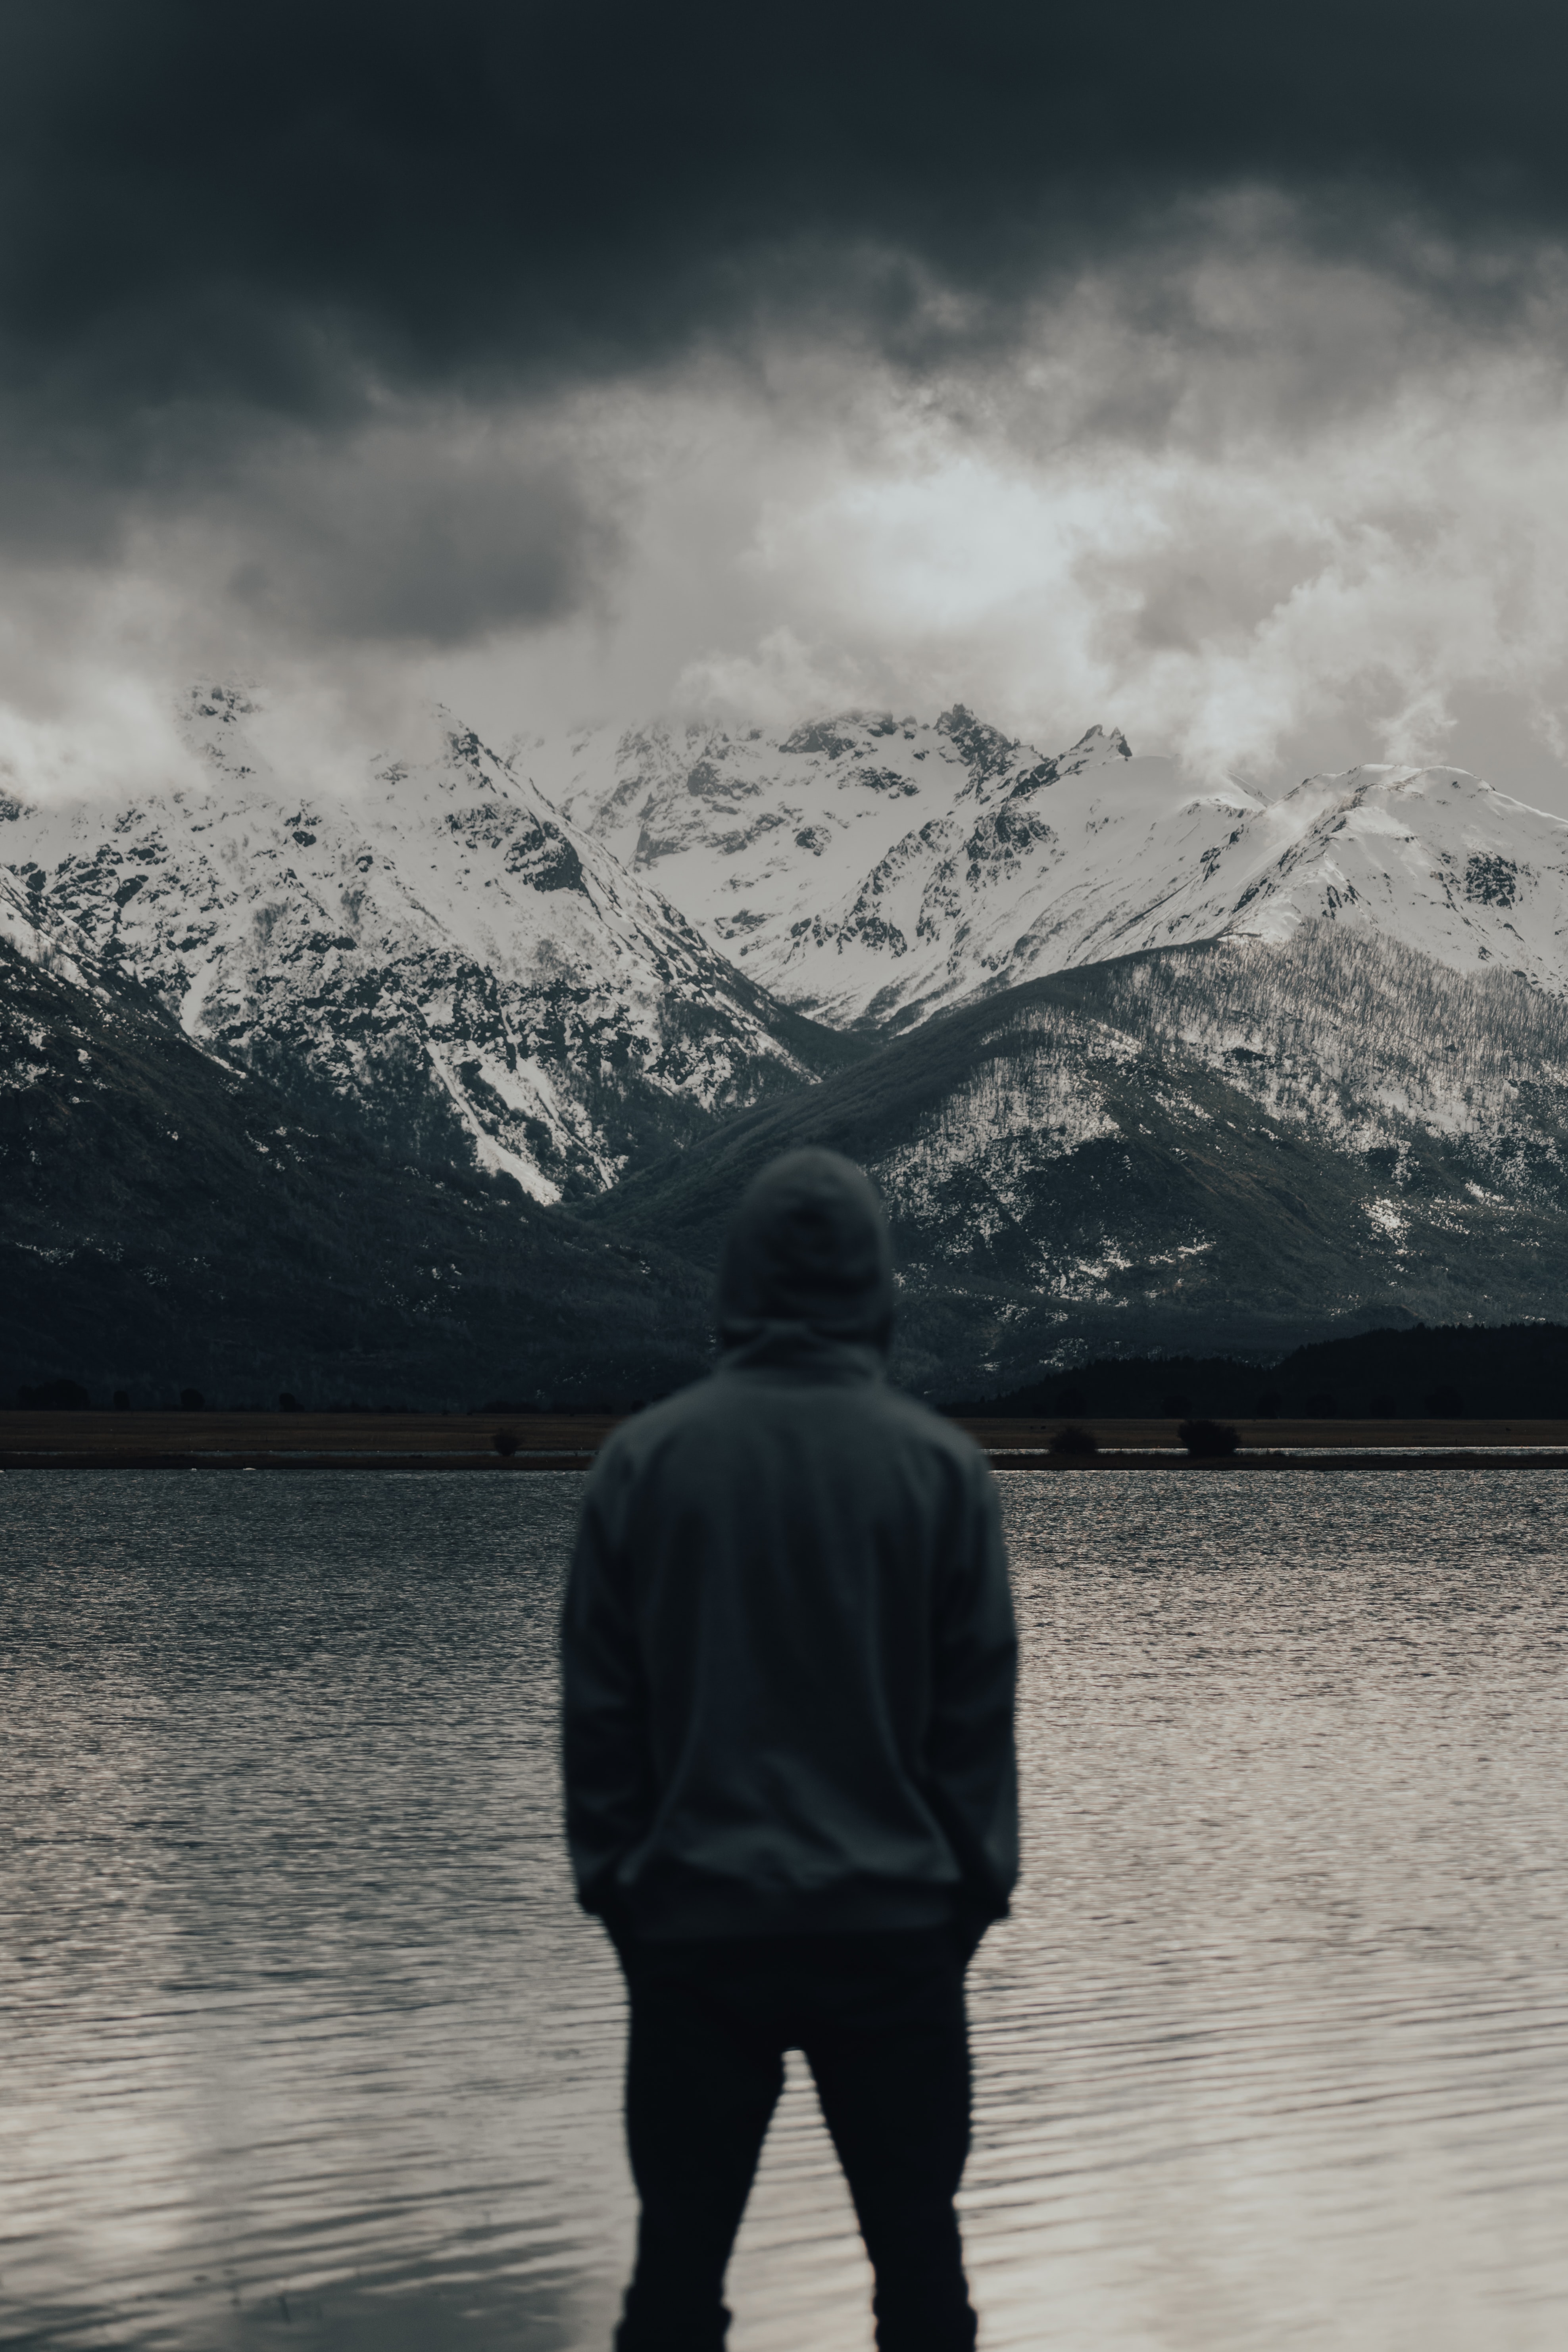 human, nature, mountains, lake, miscellanea, miscellaneous, person, loneliness wallpaper for mobile